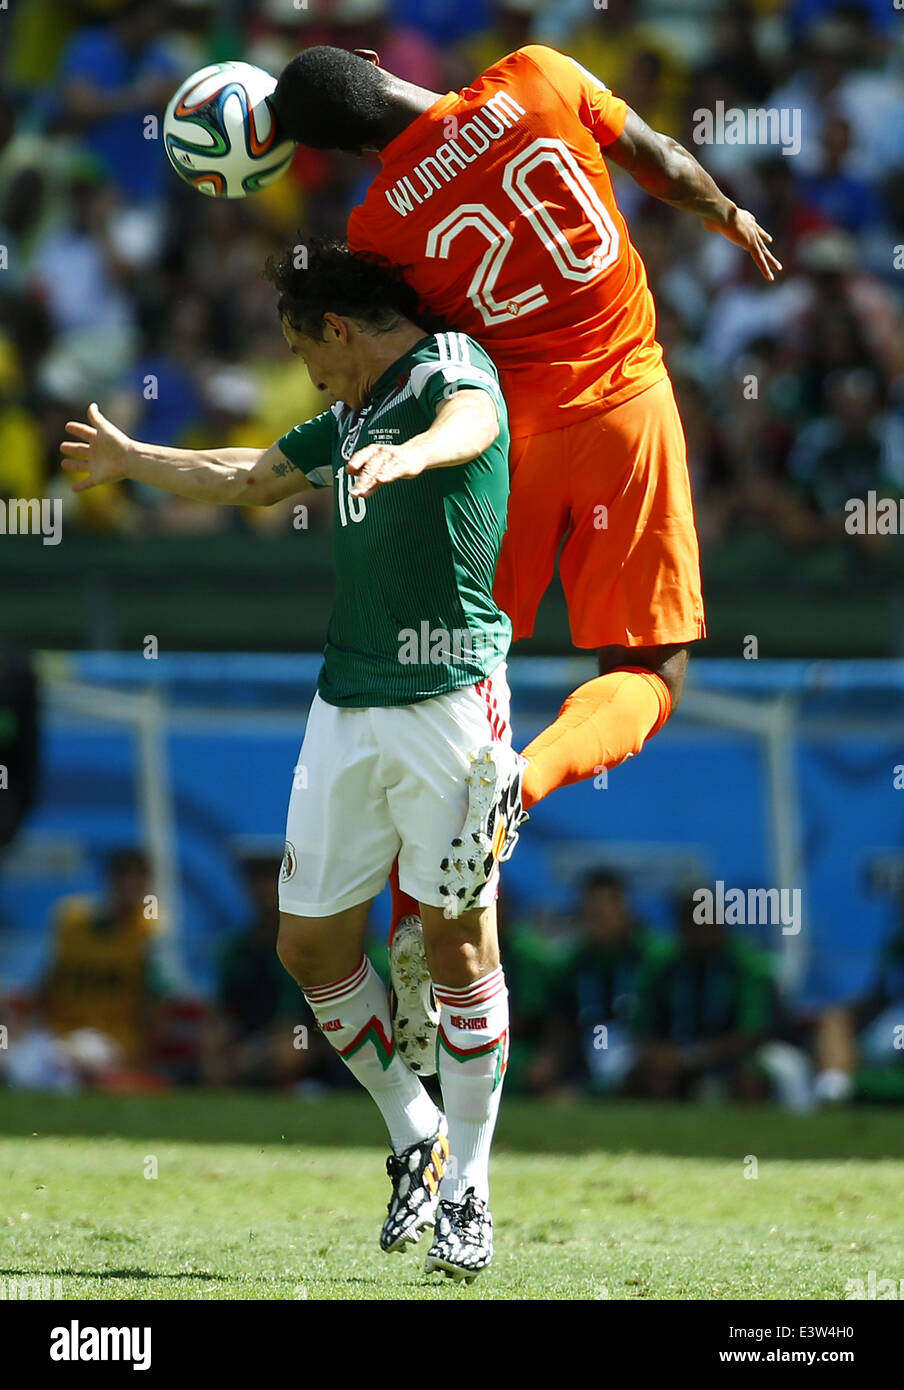 Fortaleza, Brazil. 29th June, 2014. Netherlands's Georginio Wijnaldum (R) competes for a header with Mexico's Andres Guardado during a Round of 16 match between Netherlands and Mexico of 2014 FIFA World Cup at the Estadio Castelao Stadium in Fortaleza, Brazil, on June 29, 2014. Credit:  Chen Jianli/Xinhua/Alamy Live News Stock Photo